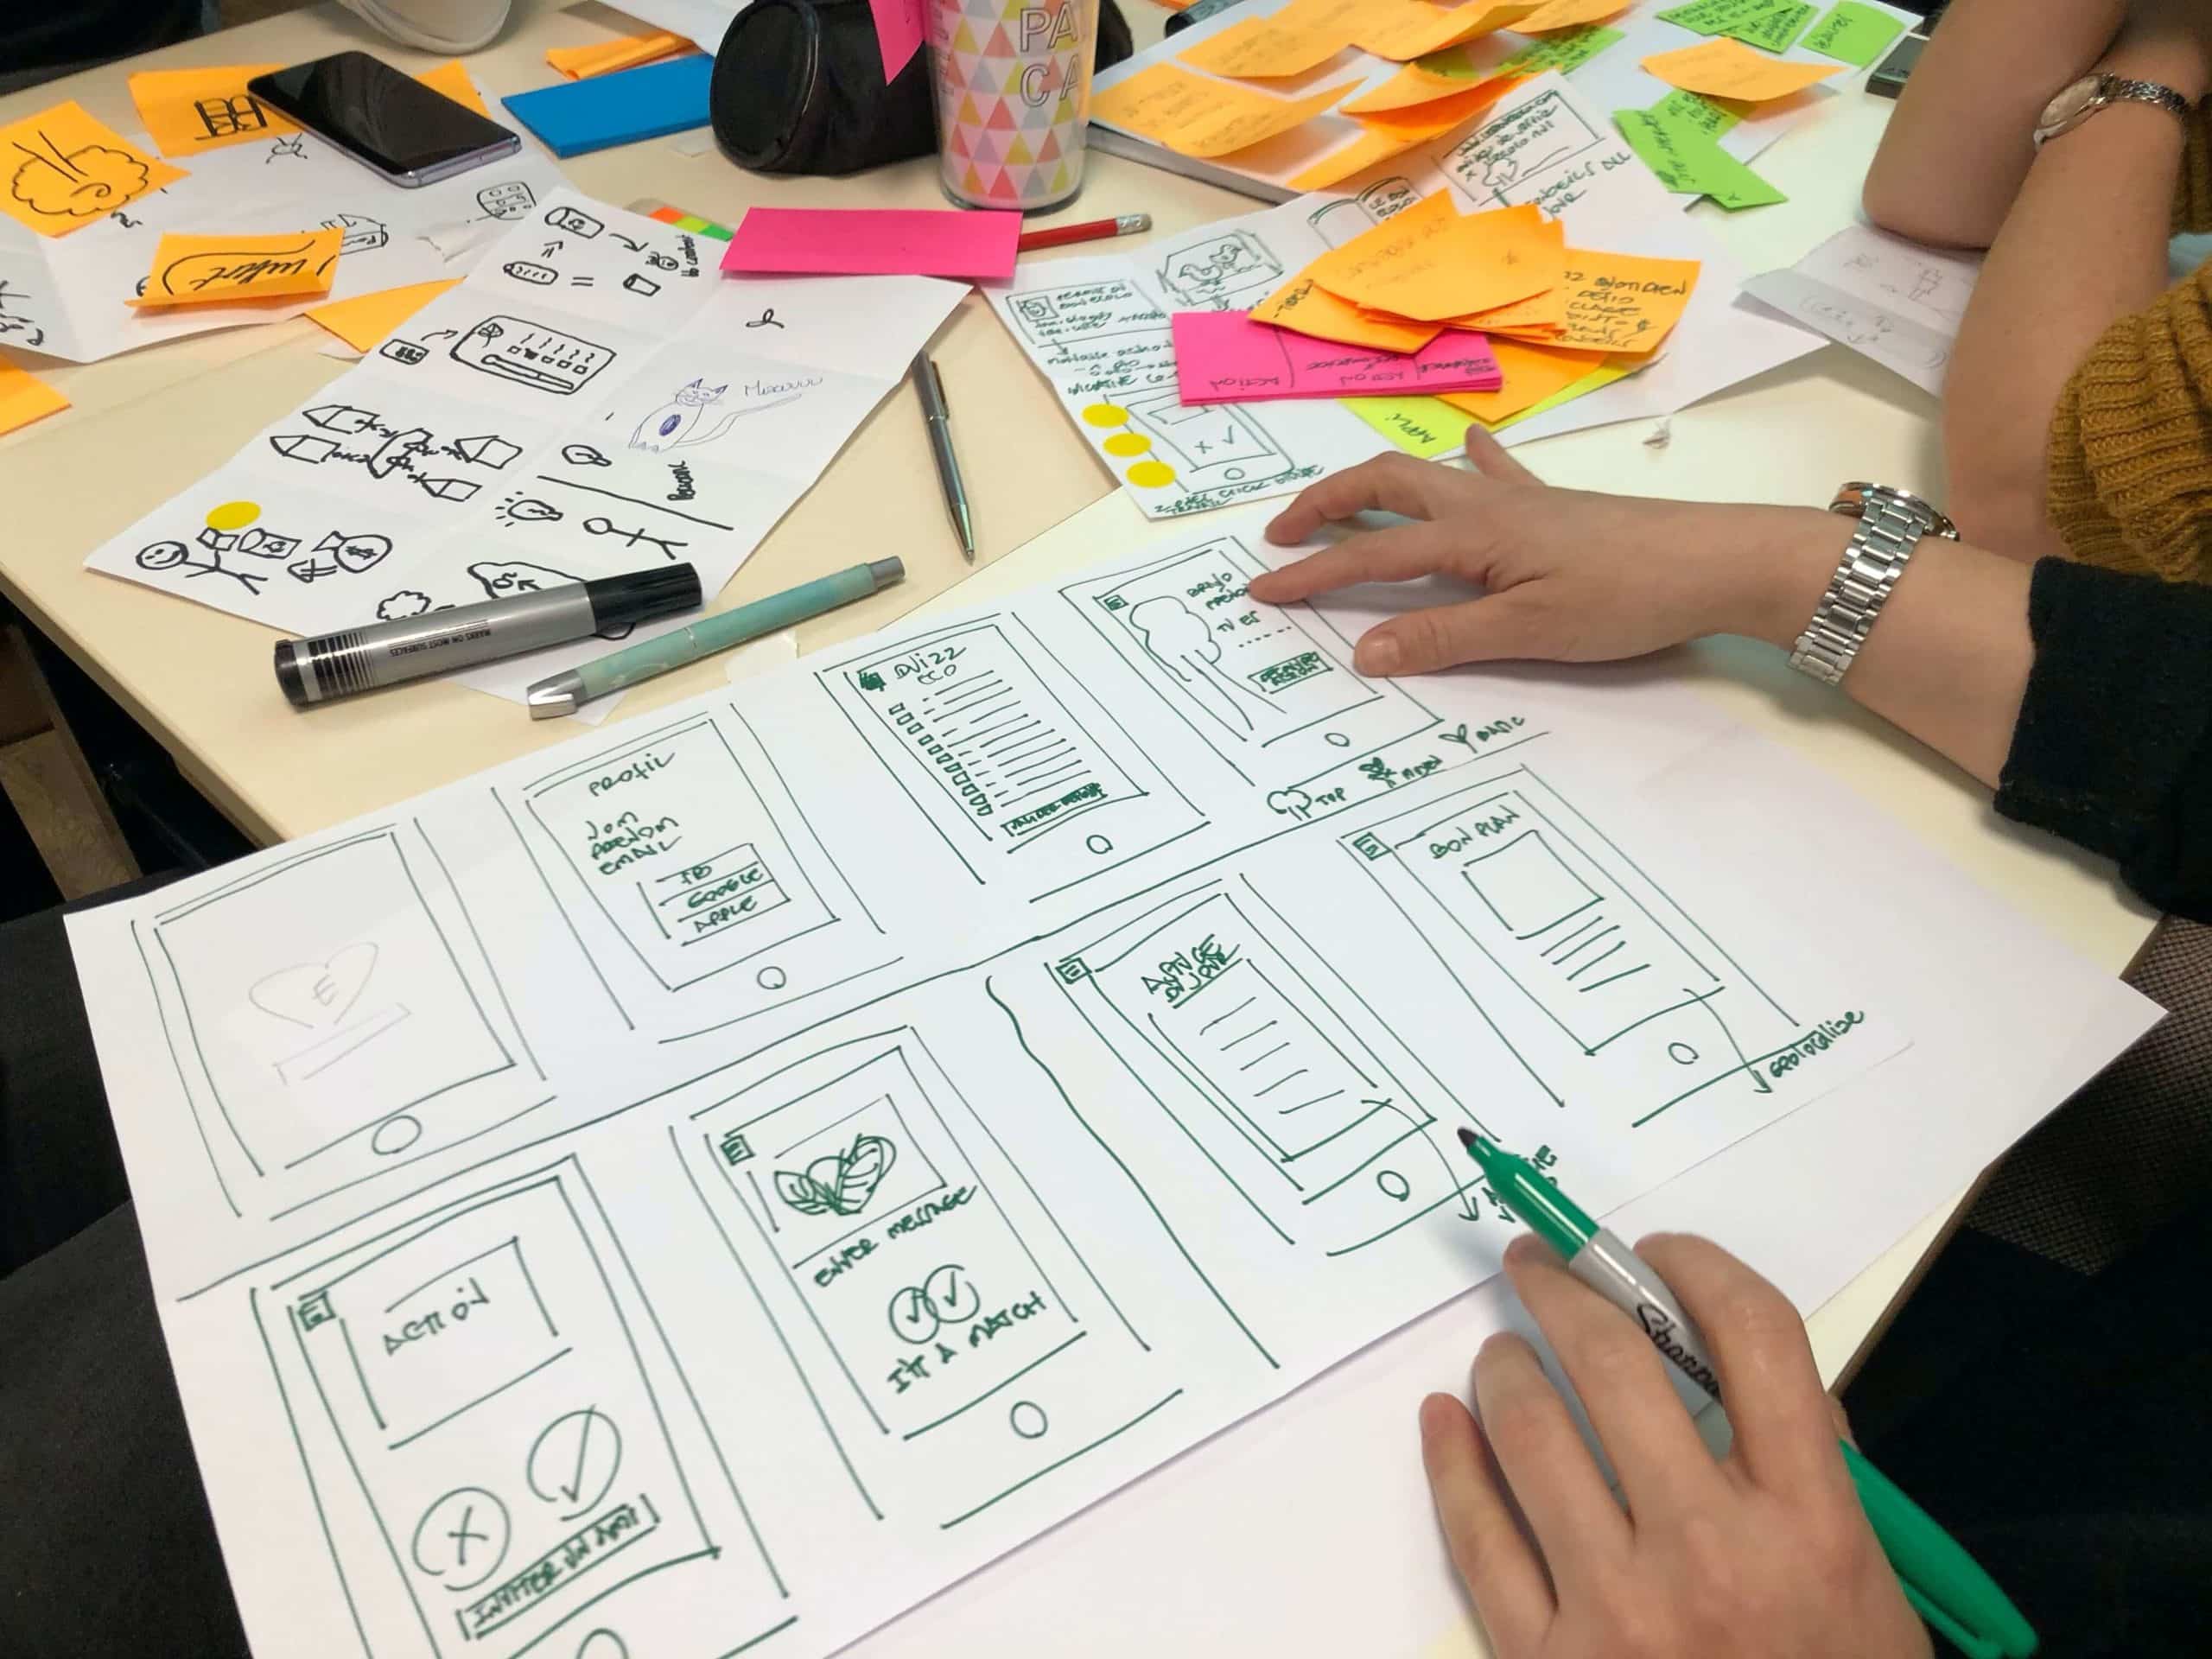 Design of an application for the management and purchase of daily meals through Design Thinking